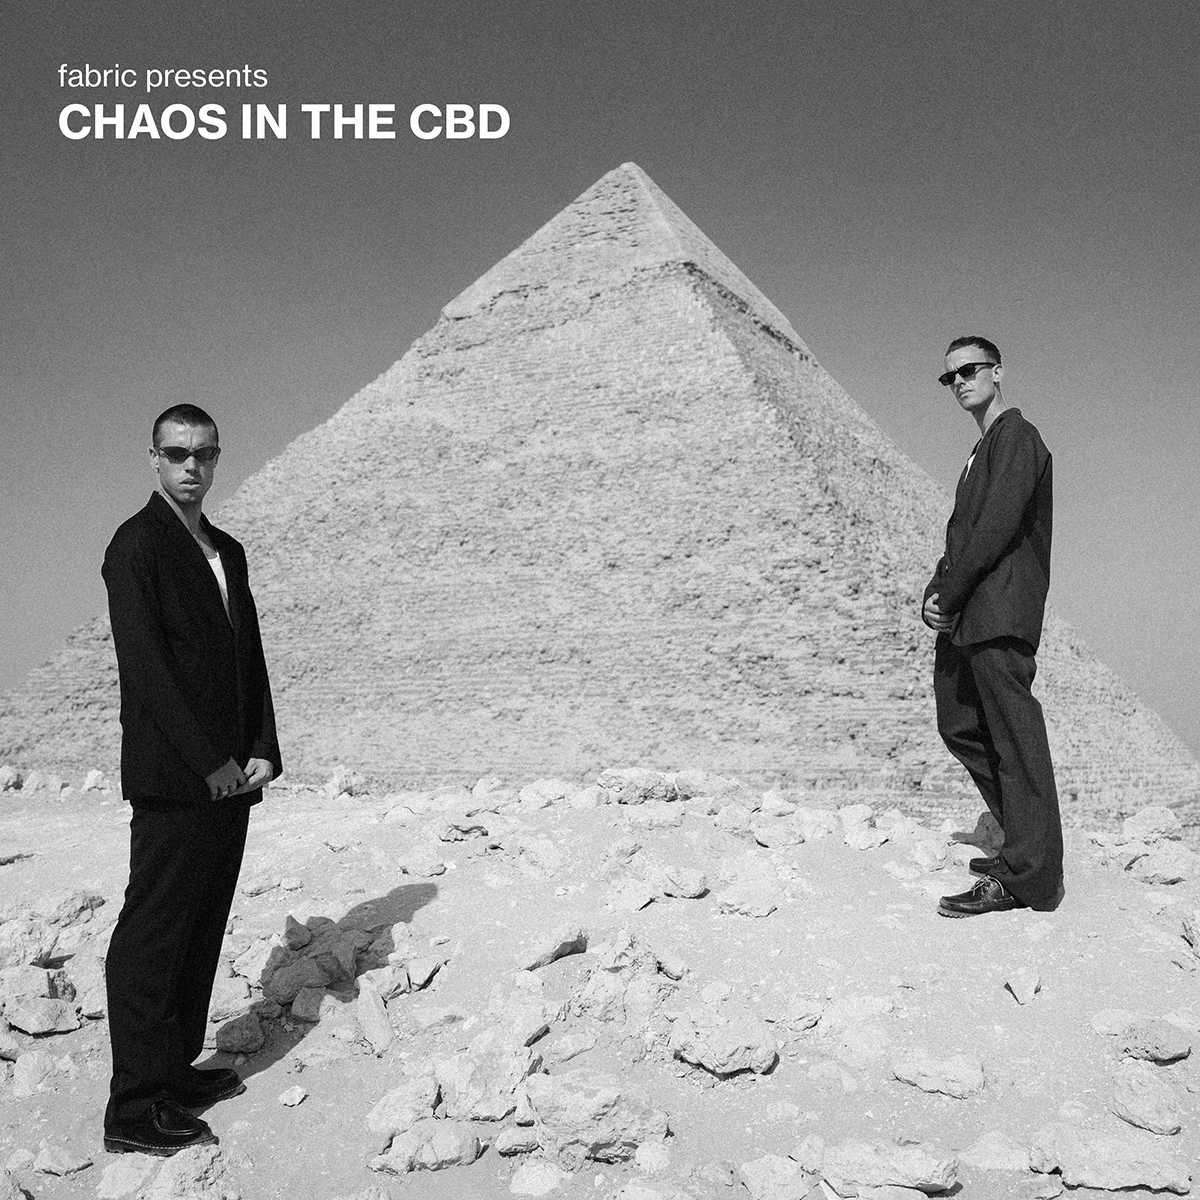 Chaos In The CBD, Various Artists - fabric presents Chaos In The CBD: CD